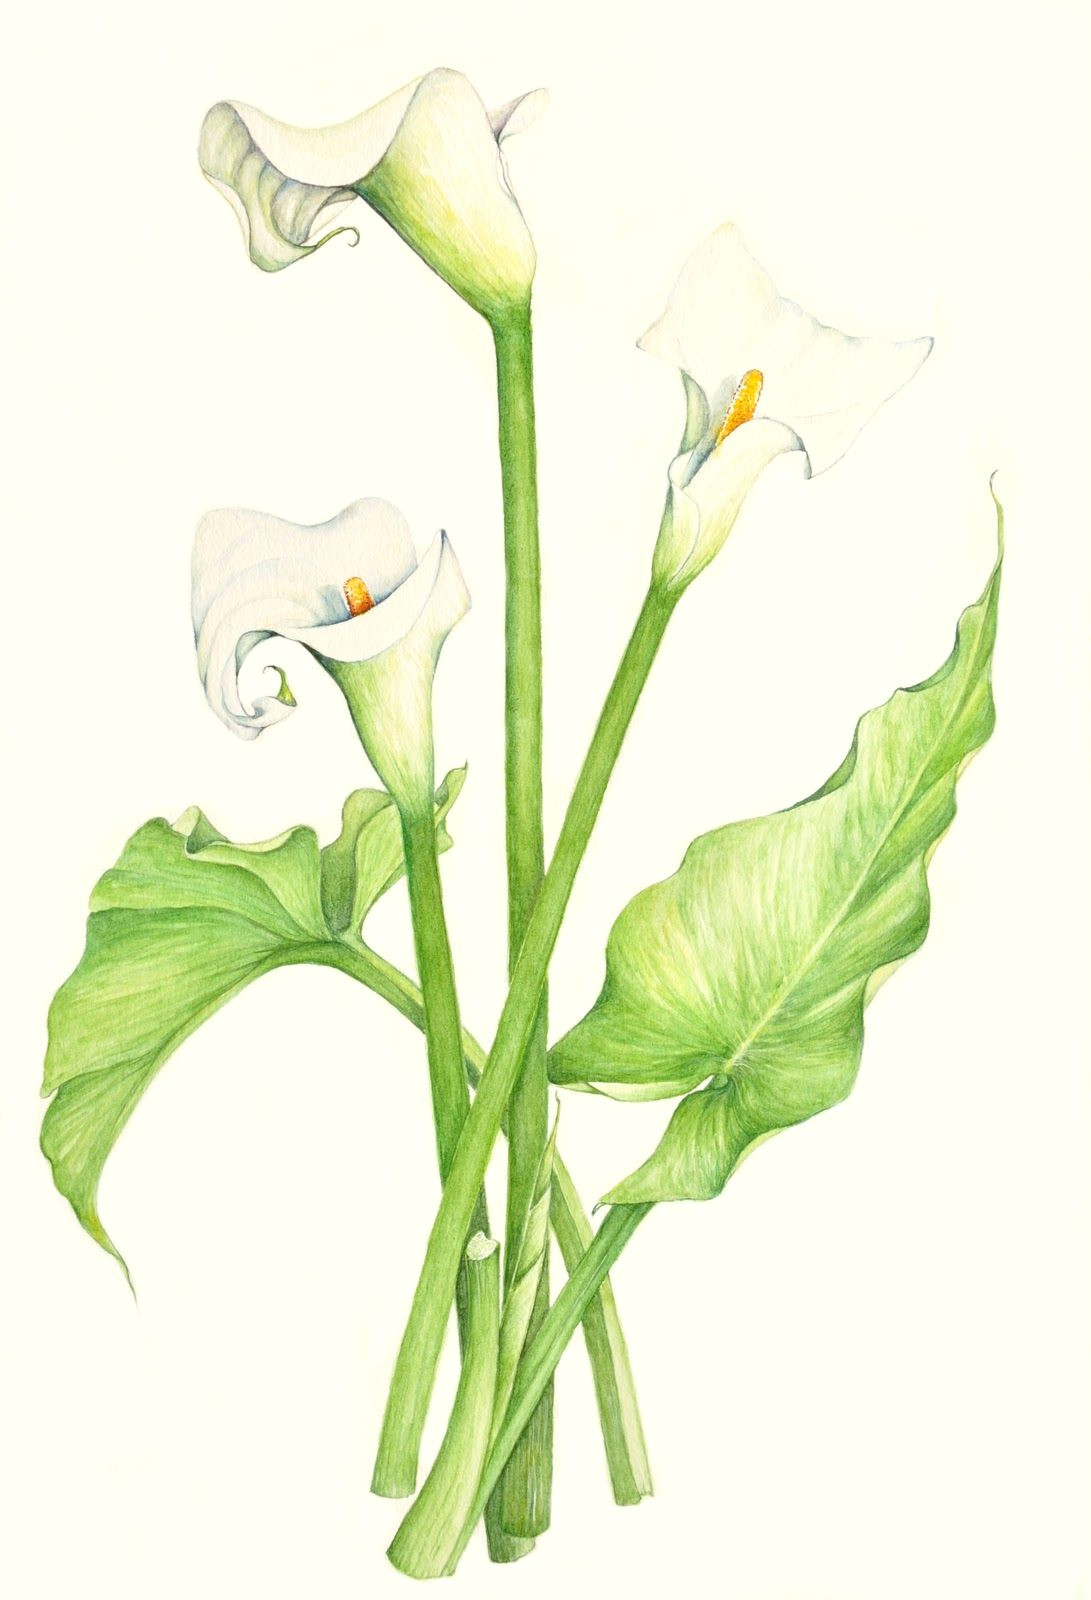 Drawings Of Calla Lily Flowers Calla Lily Leaves Google Search Varkore Pinte